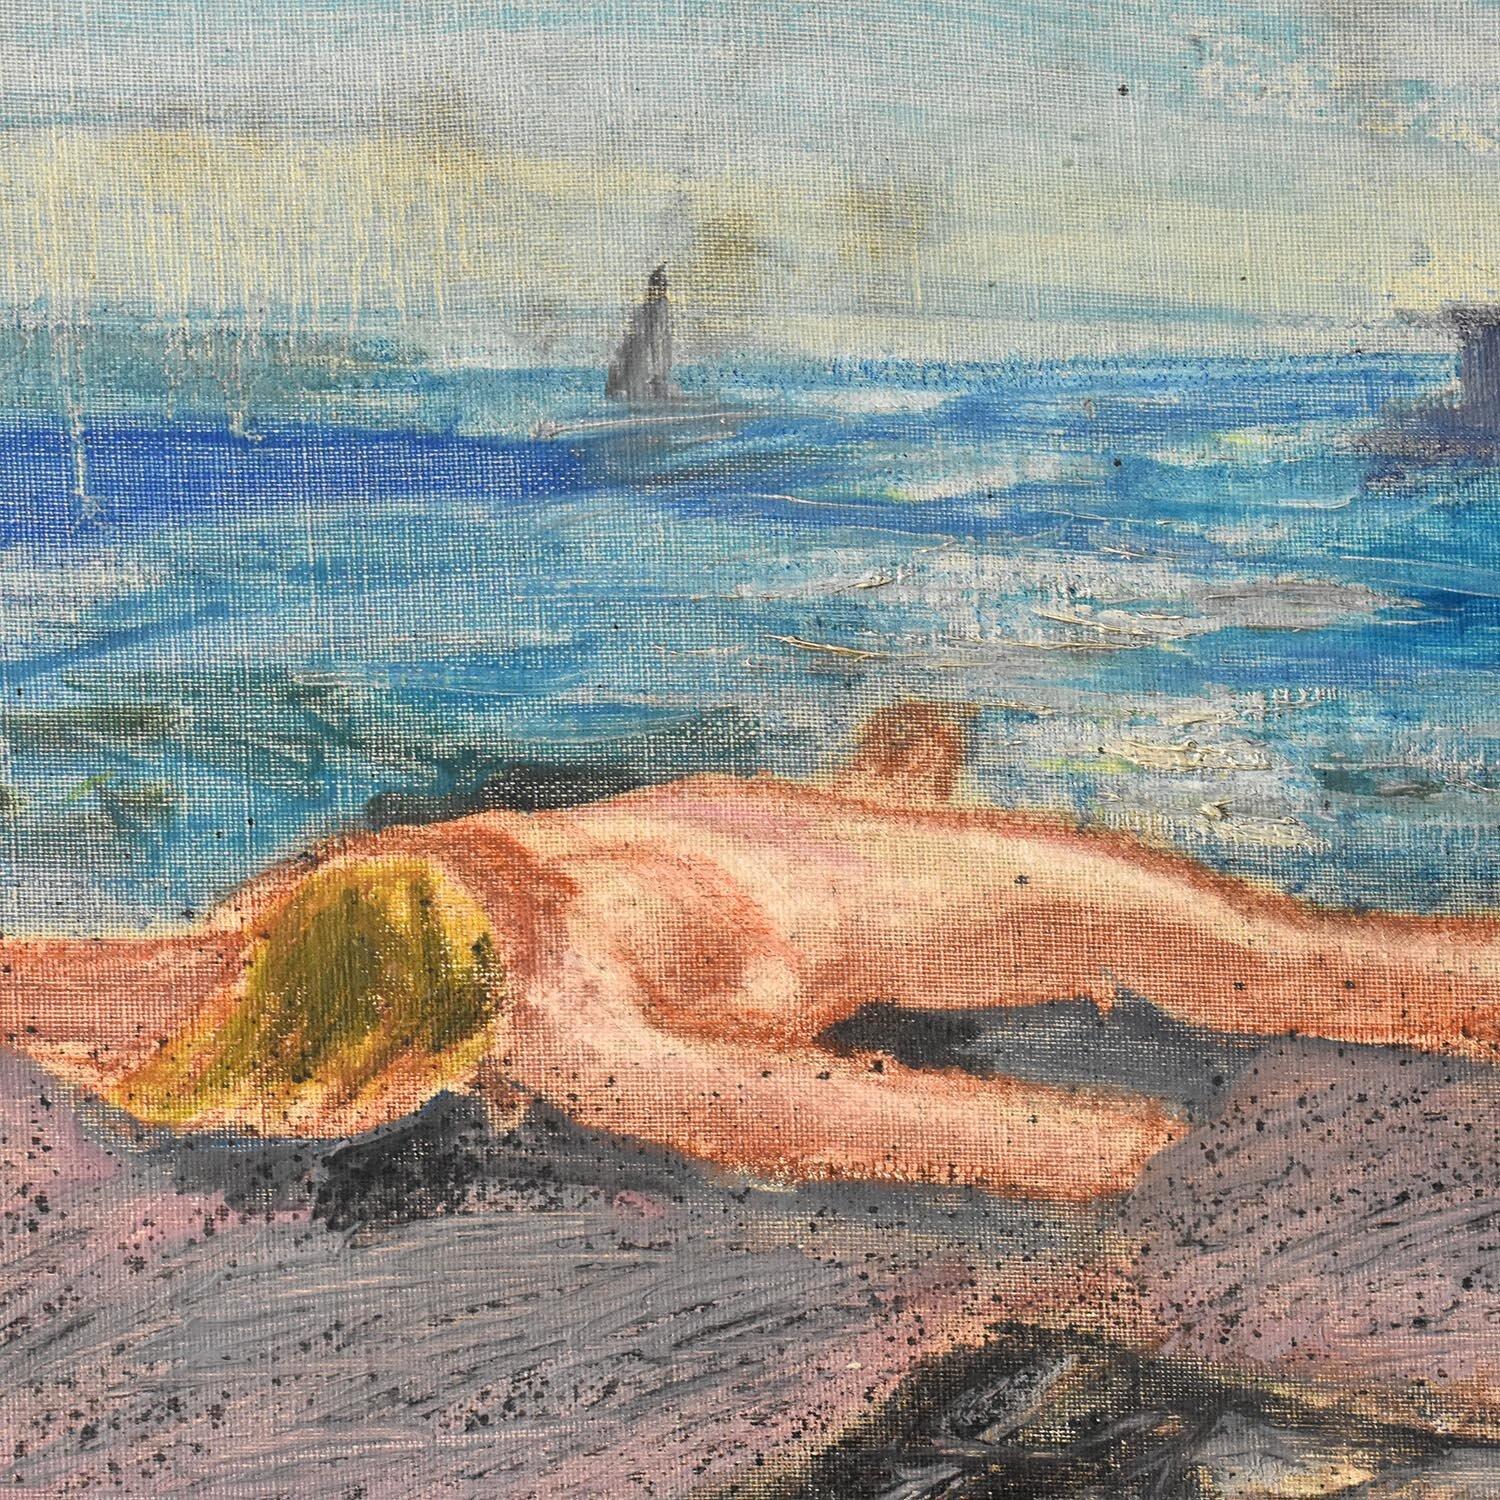 ORIGINAL VINTAGE OIL ON BOARD PAINTING BY AKOS BIRO, HUNGARIAN 1911-2002

Free-moving, sketchy brushstrokes really capture the feeling of lying naked in the South of France in the gentle sea breeze. 

I think you could probably pinpoint exactly